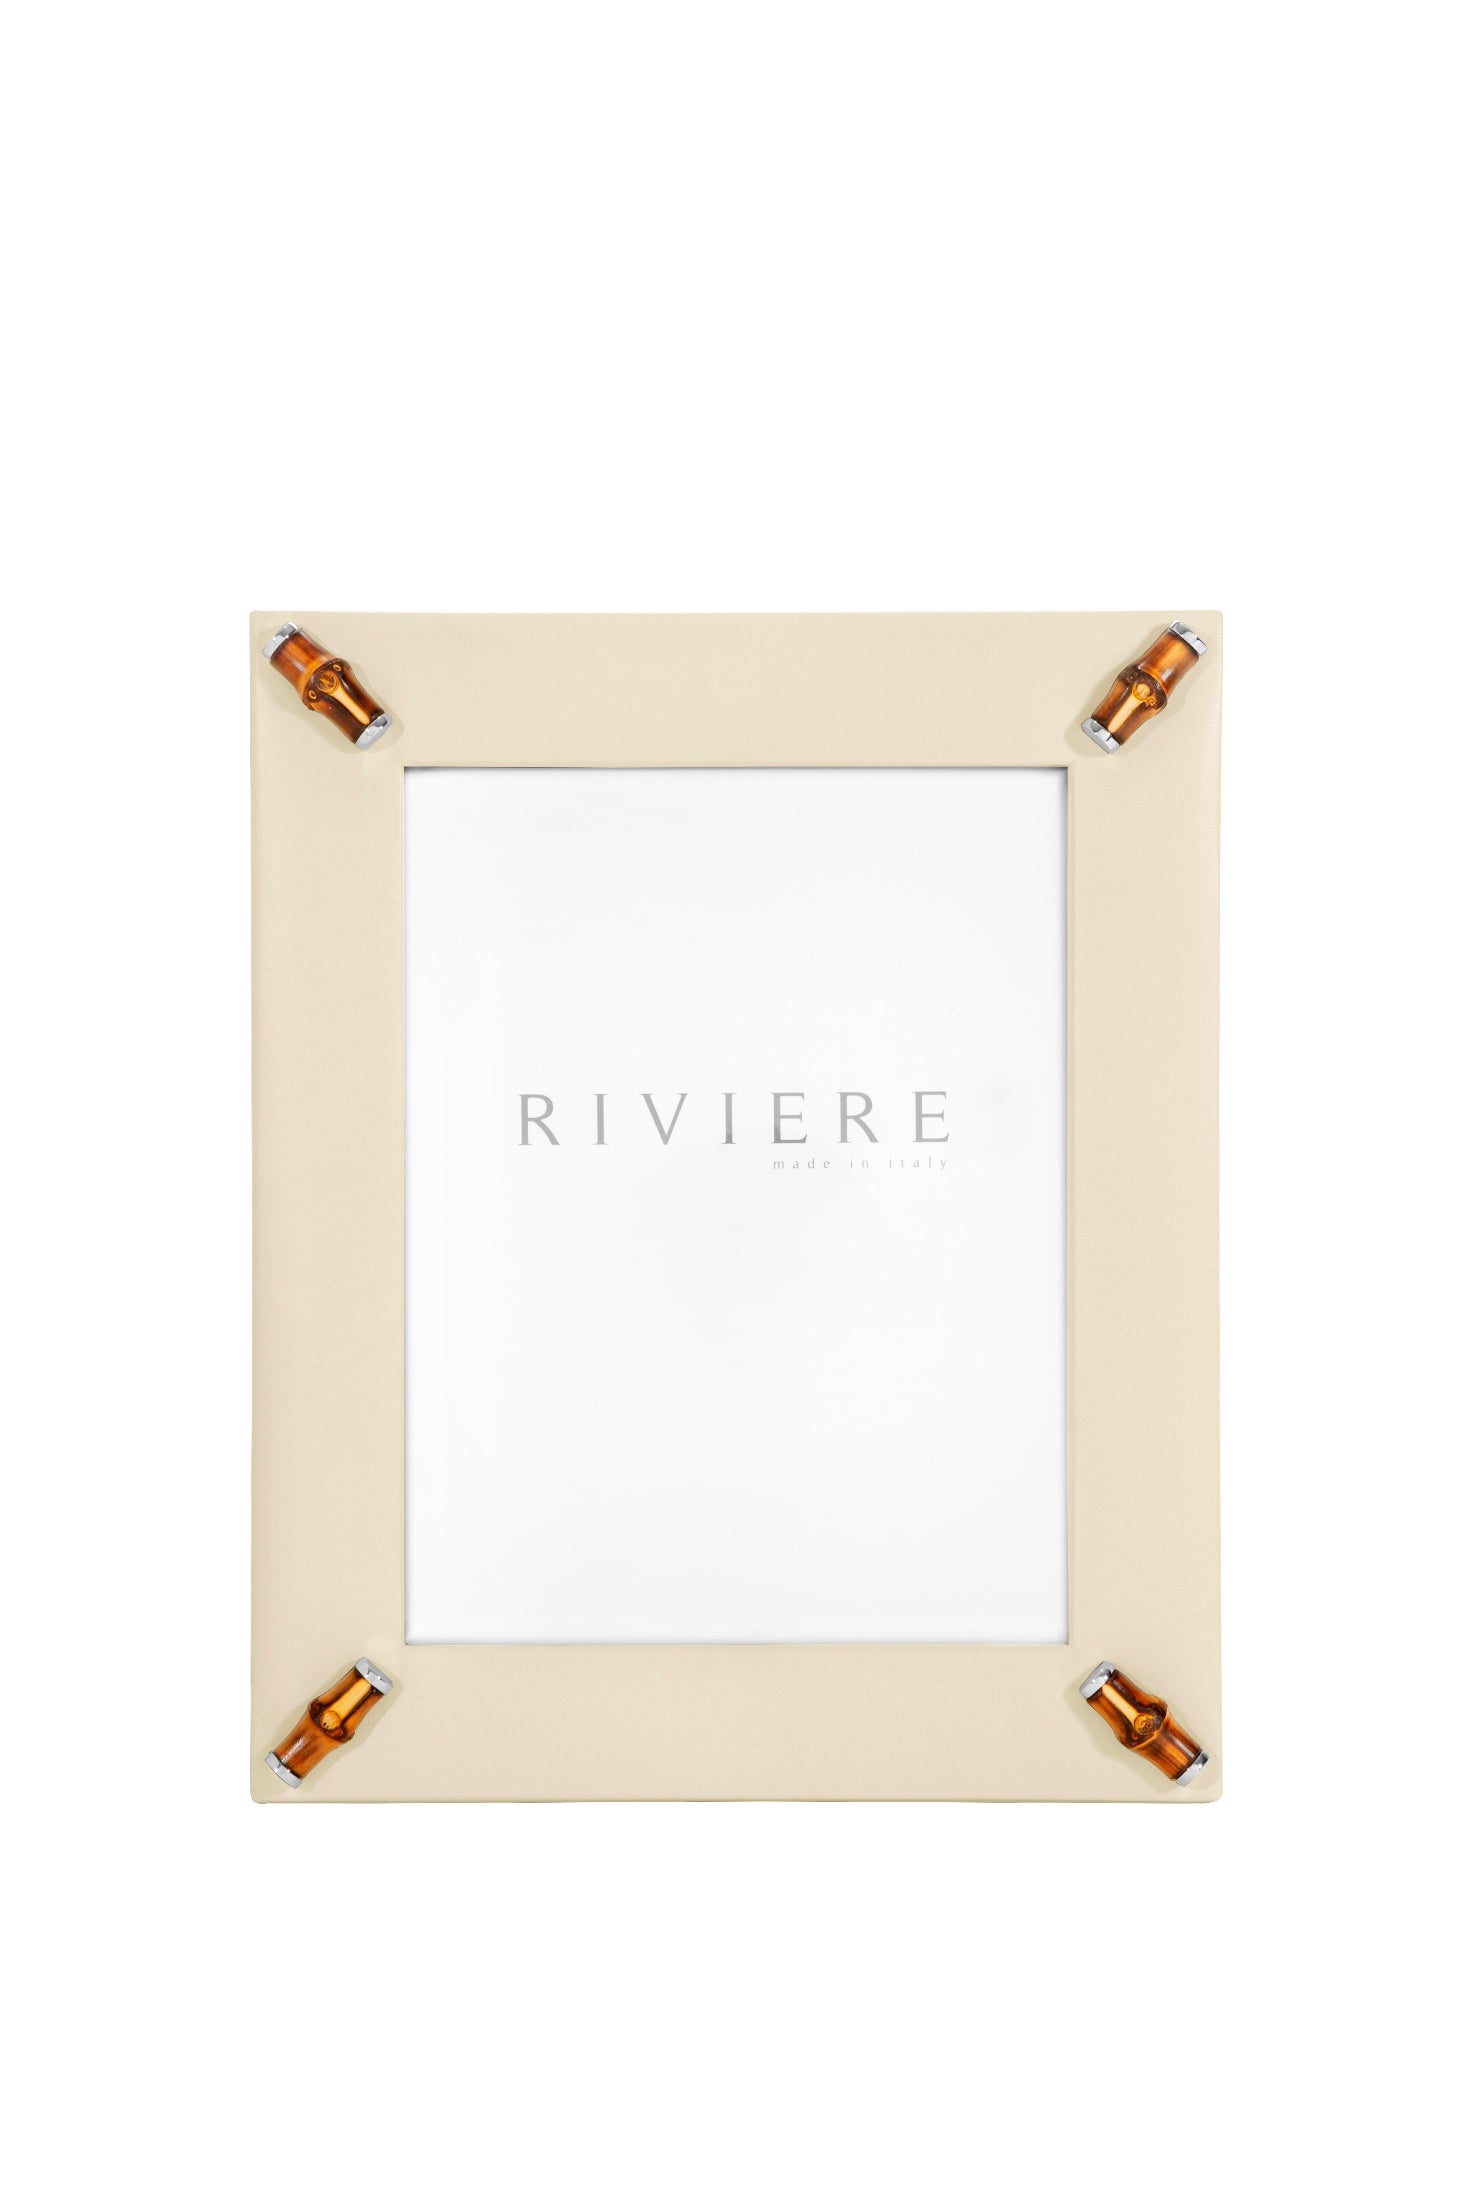 Riviere Frida Leather Picture Frame With Bamboo Corners & Metal Details | Stylish Leather Frame with Bamboo Corners | Elegant Metal Details for a Refined Look | Elevate Your Home Decor with Luxury Accessories from Riviere | Available at 2Jour Concierge, #1 luxury high-end gift & lifestyle shop